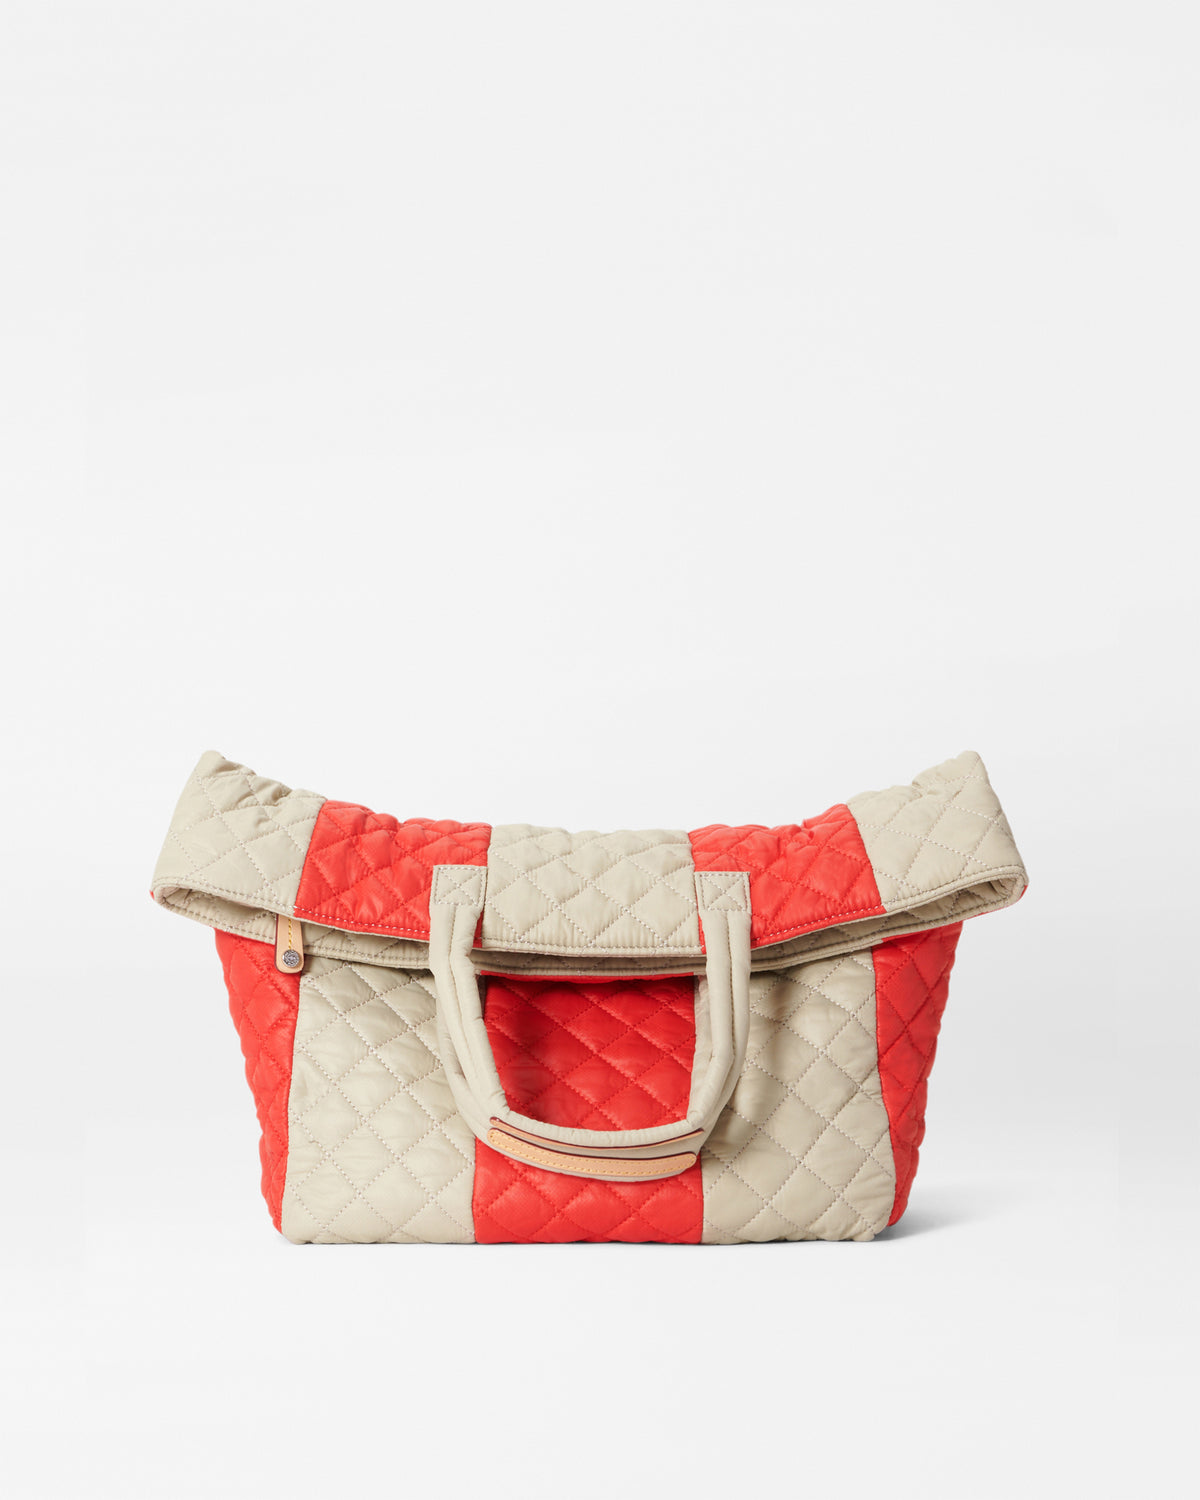 MZ Wallace Atmosphere/Cherry Cabana Tote